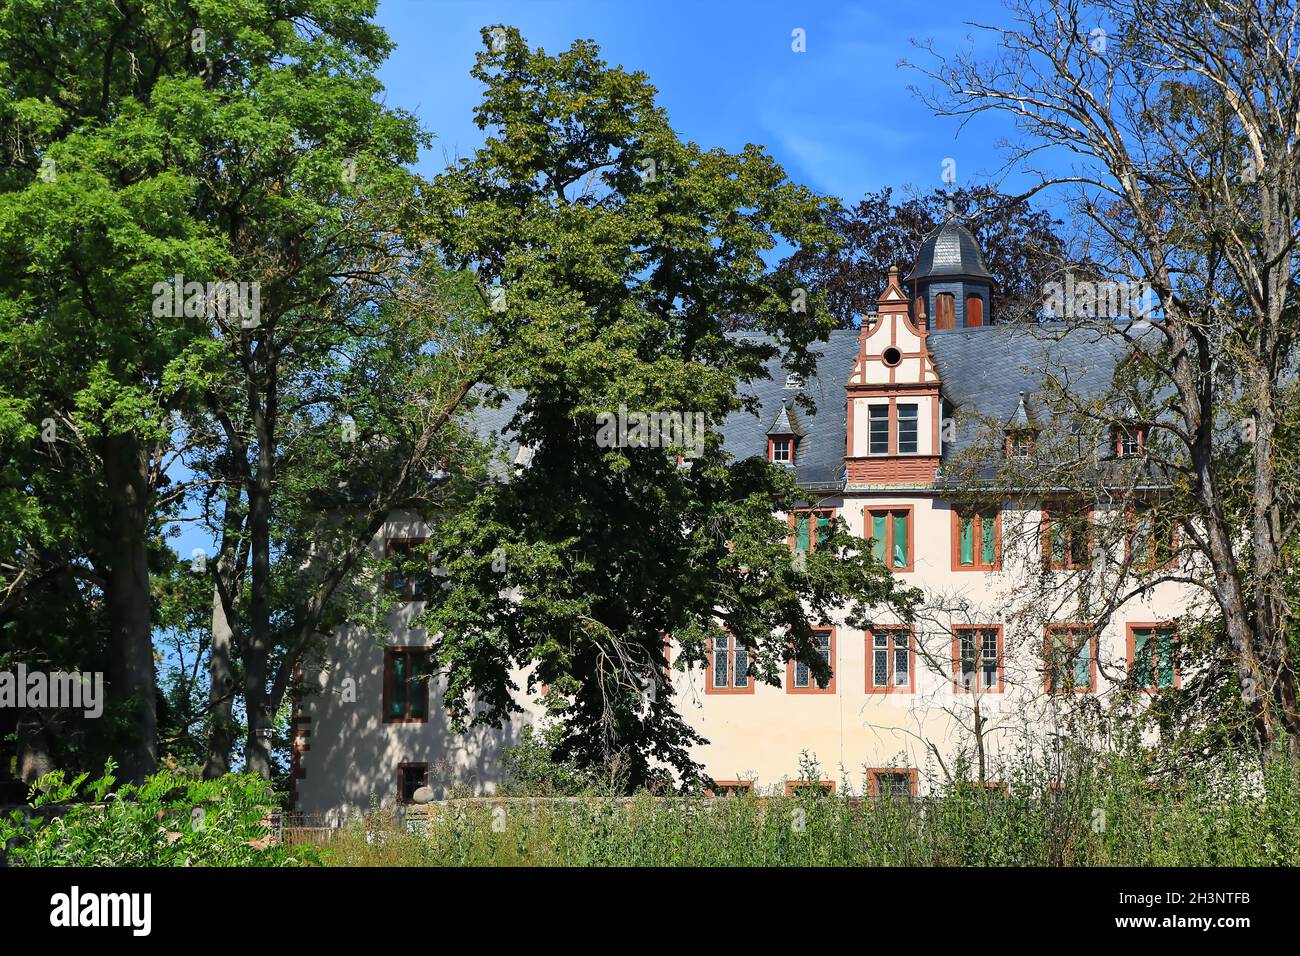 Babenhausen is a town in Bavaria with many historical Stock Photo